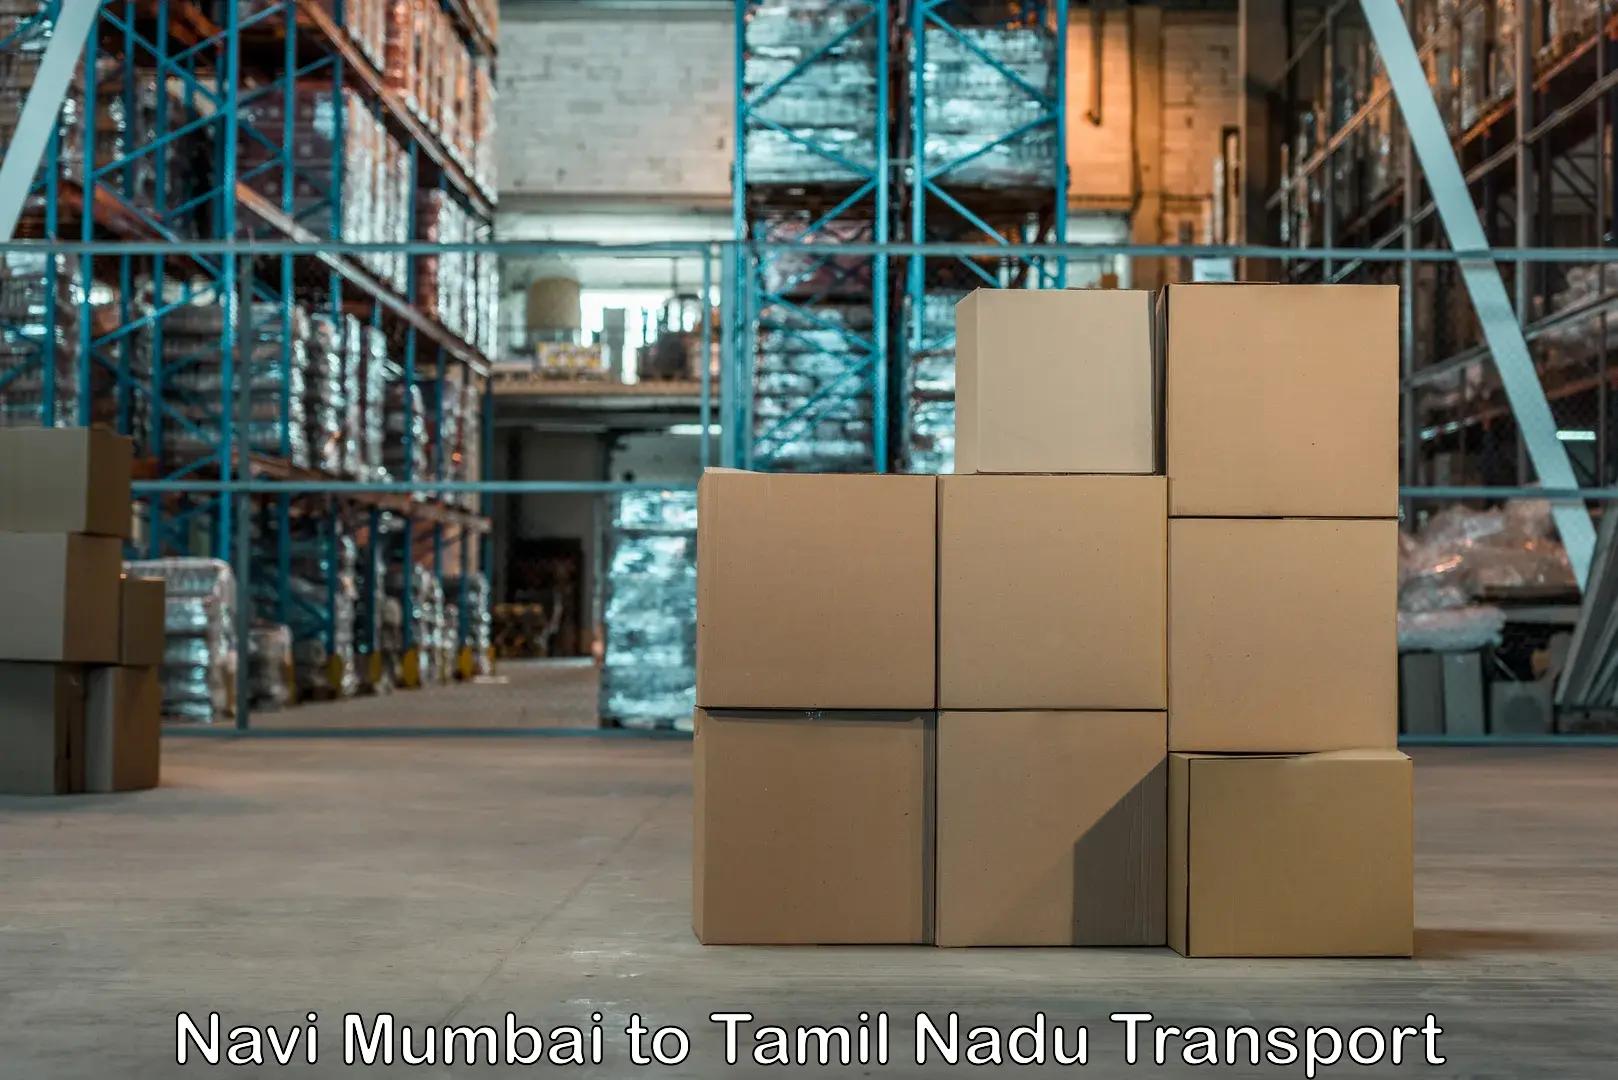 Transport bike from one state to another Navi Mumbai to Ennore Port Chennai